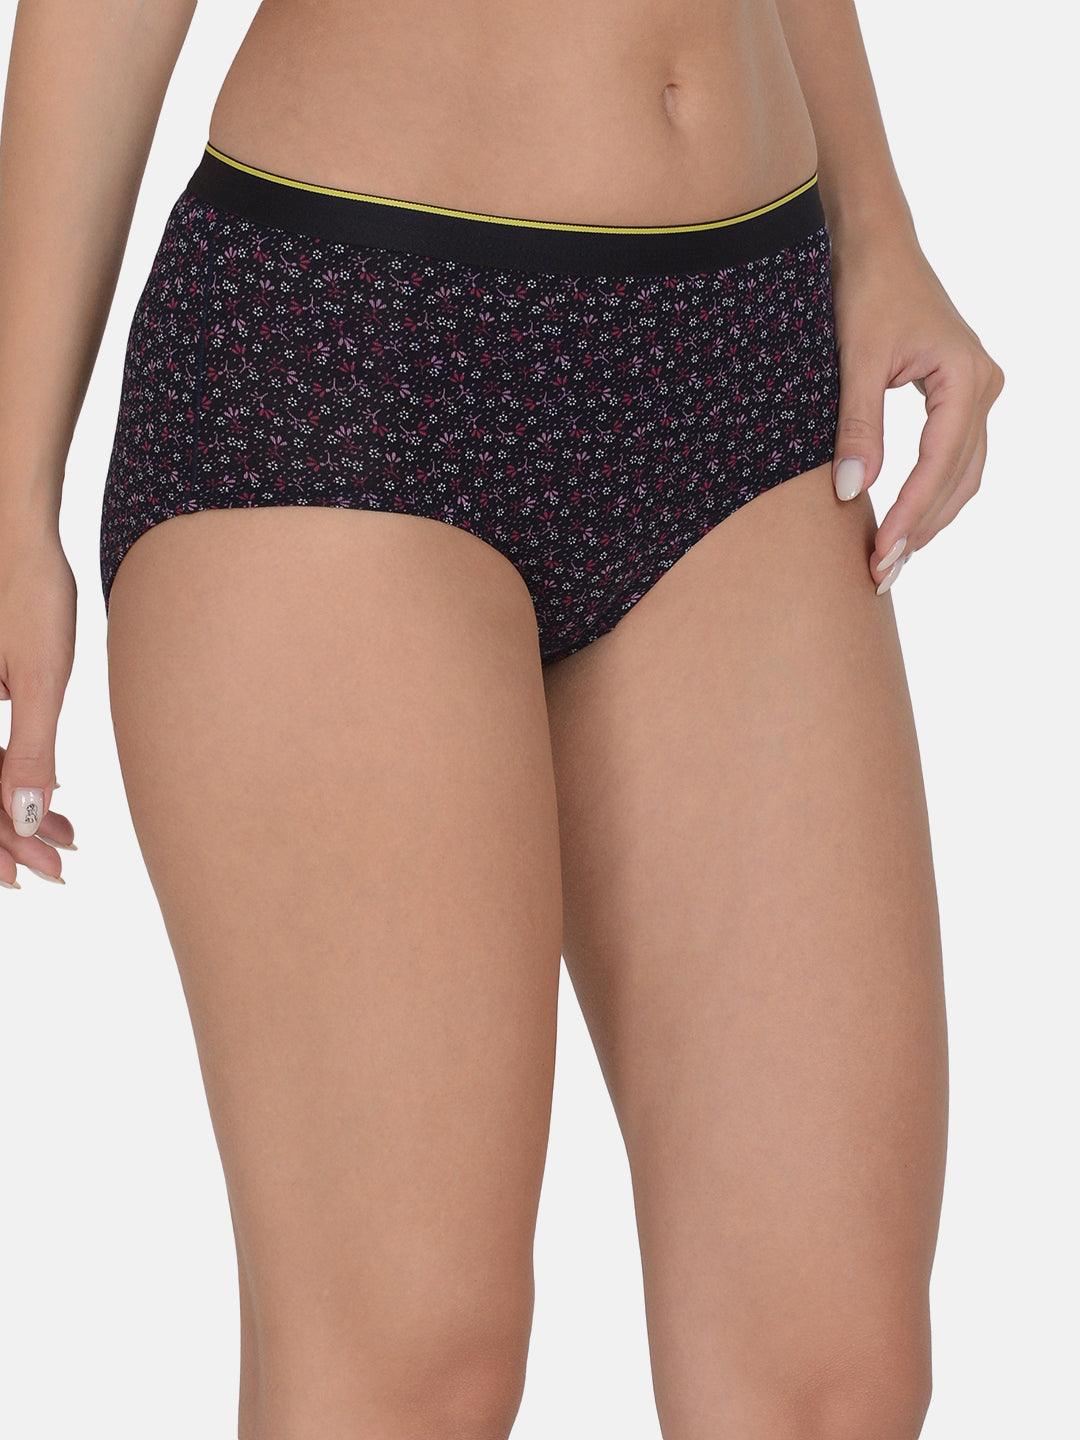 Women's Printed 4 way Stretch Hipster Brief Pack of 3 with Modal Fabric | MM-HIPSTER-PR001-3 | Leading Lady